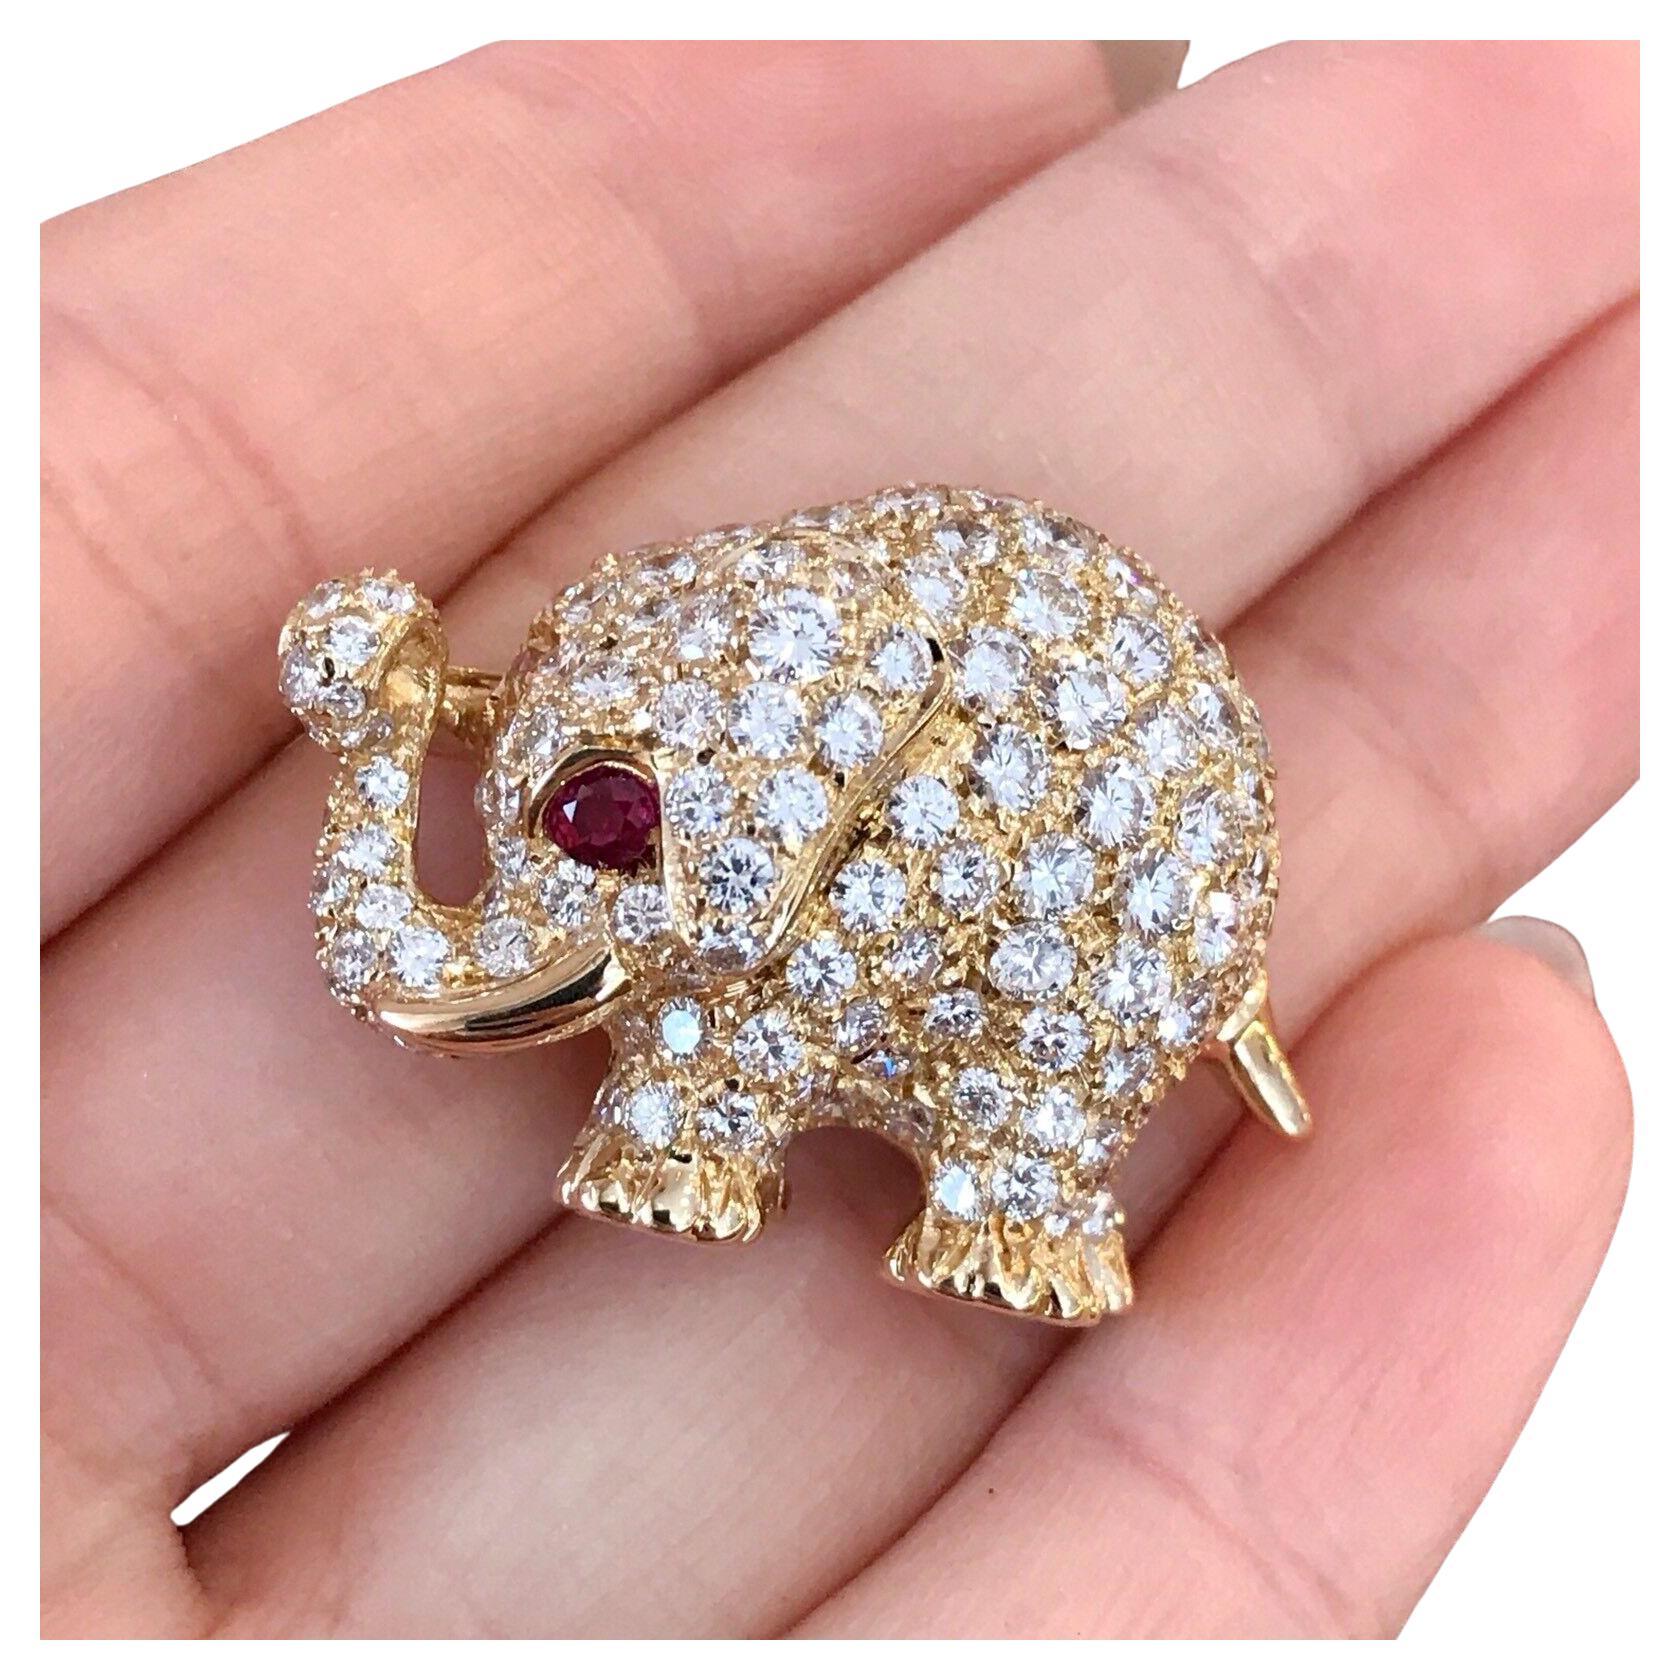 8.00 Carats Total Weight Diamond Elephant Pin / Brooch in 18k Yellow Gold

Beautiful Diamond Elephant Brooch features an 18k Yellow Gold Elephant encrusted with approximately 8.00 carats of Round Brilliant Cut Diamonds Pavé set throughout the body,